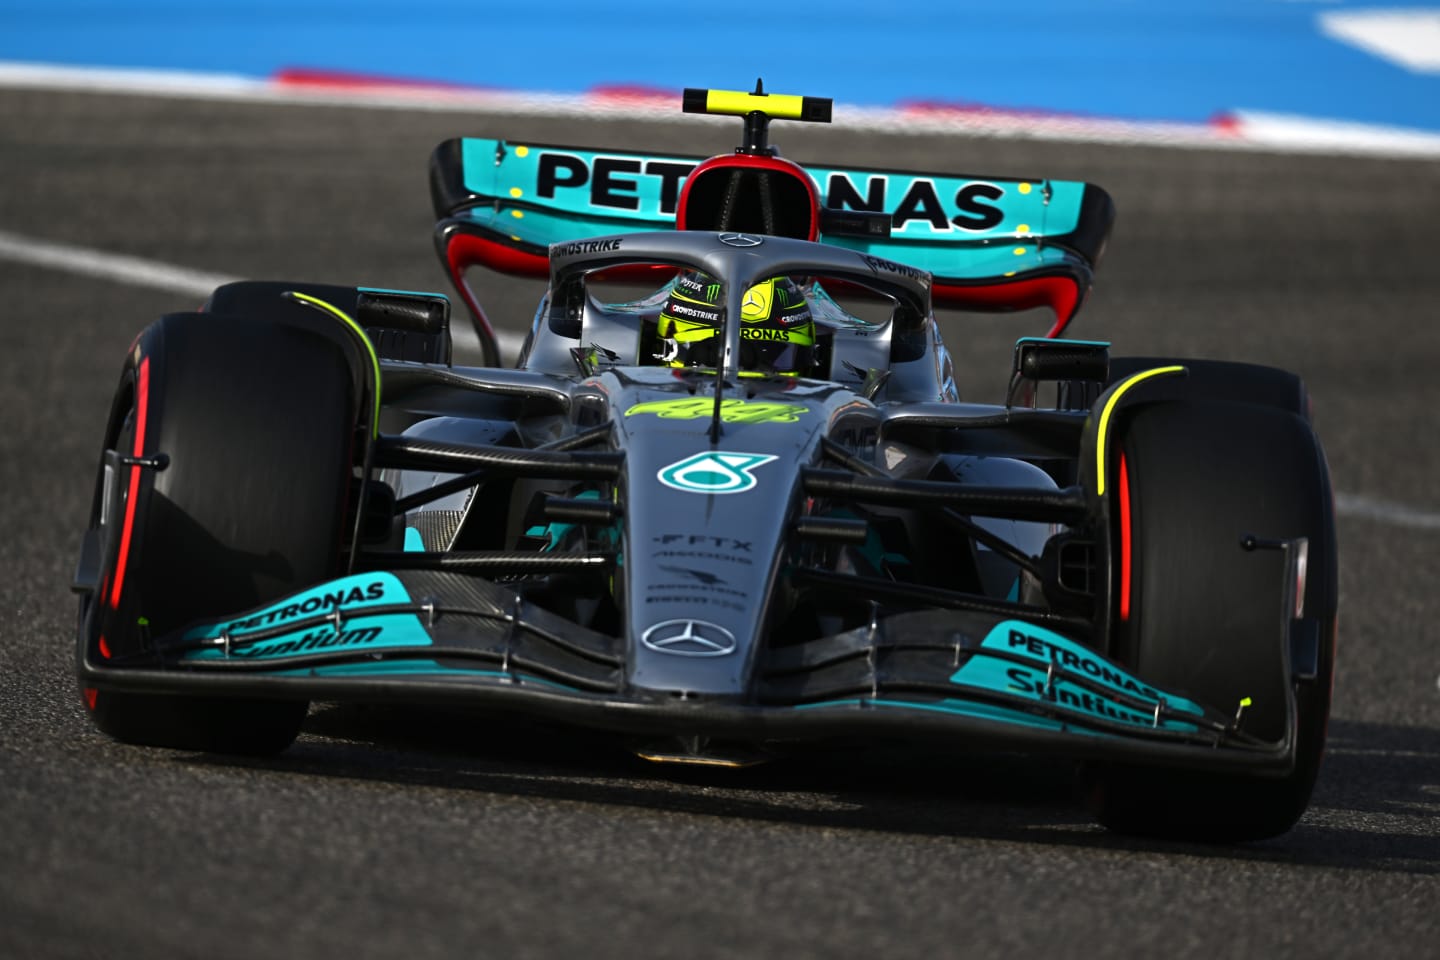 BAHRAIN, BAHRAIN - MARCH 18: Lewis Hamilton of Great Britain driving the (44) Mercedes AMG Petronas F1 Team W13 on track during practice ahead of the F1 Grand Prix of Bahrain at Bahrain International Circuit on March 18, 2022 in Bahrain, Bahrain. (Photo by Clive Mason/Getty Images)